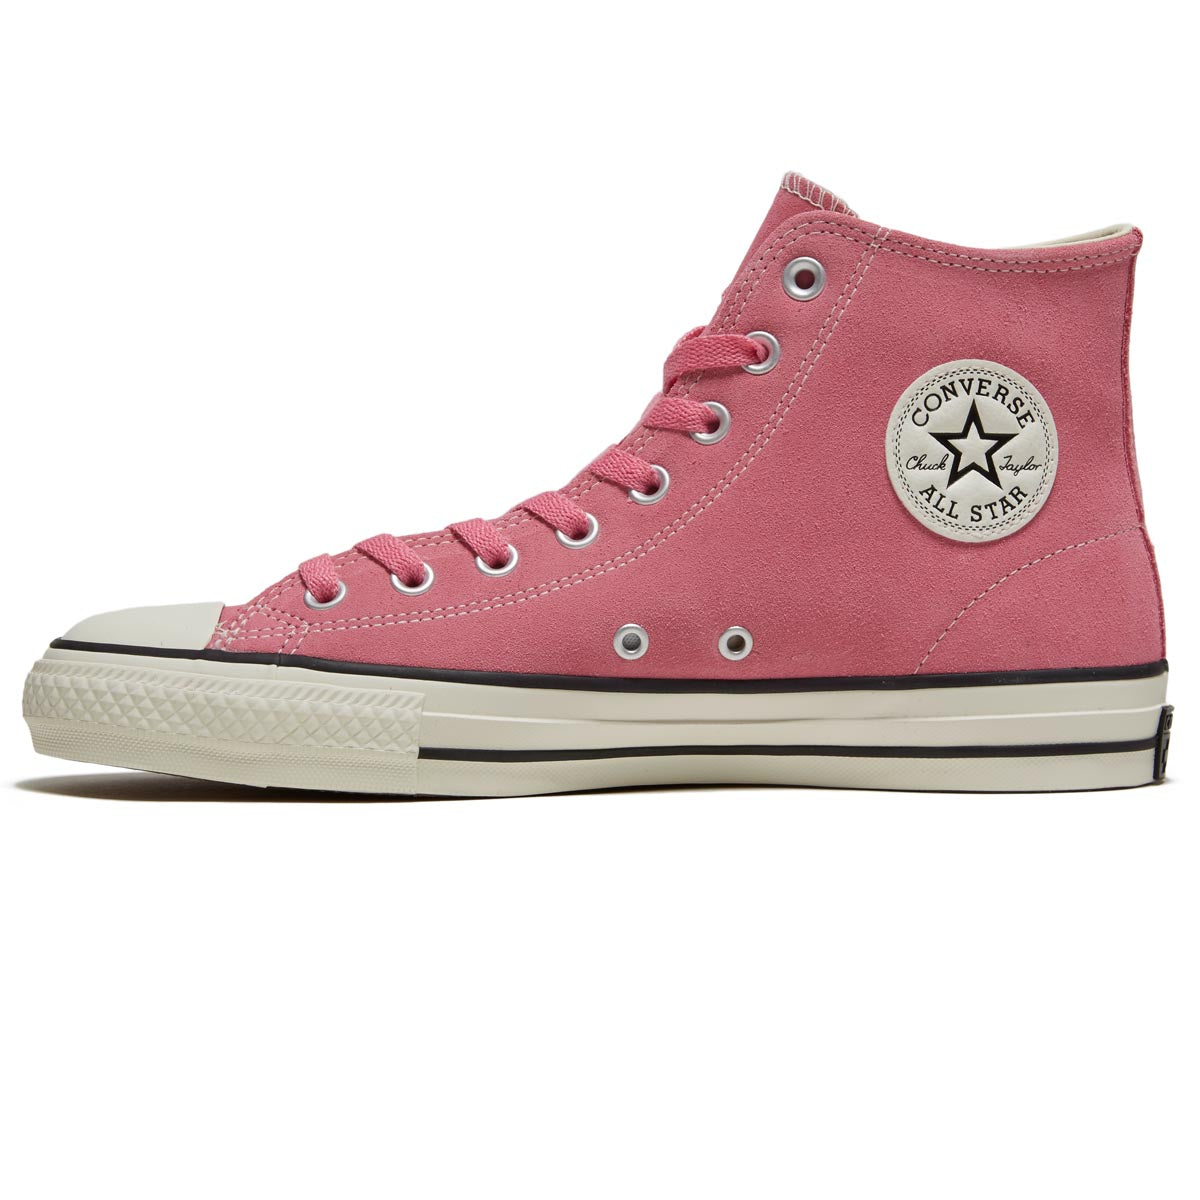 Converse Chuck Taylor All Star Pro Suede Hi Shoes - Oops Pink/Egret/Black image 2